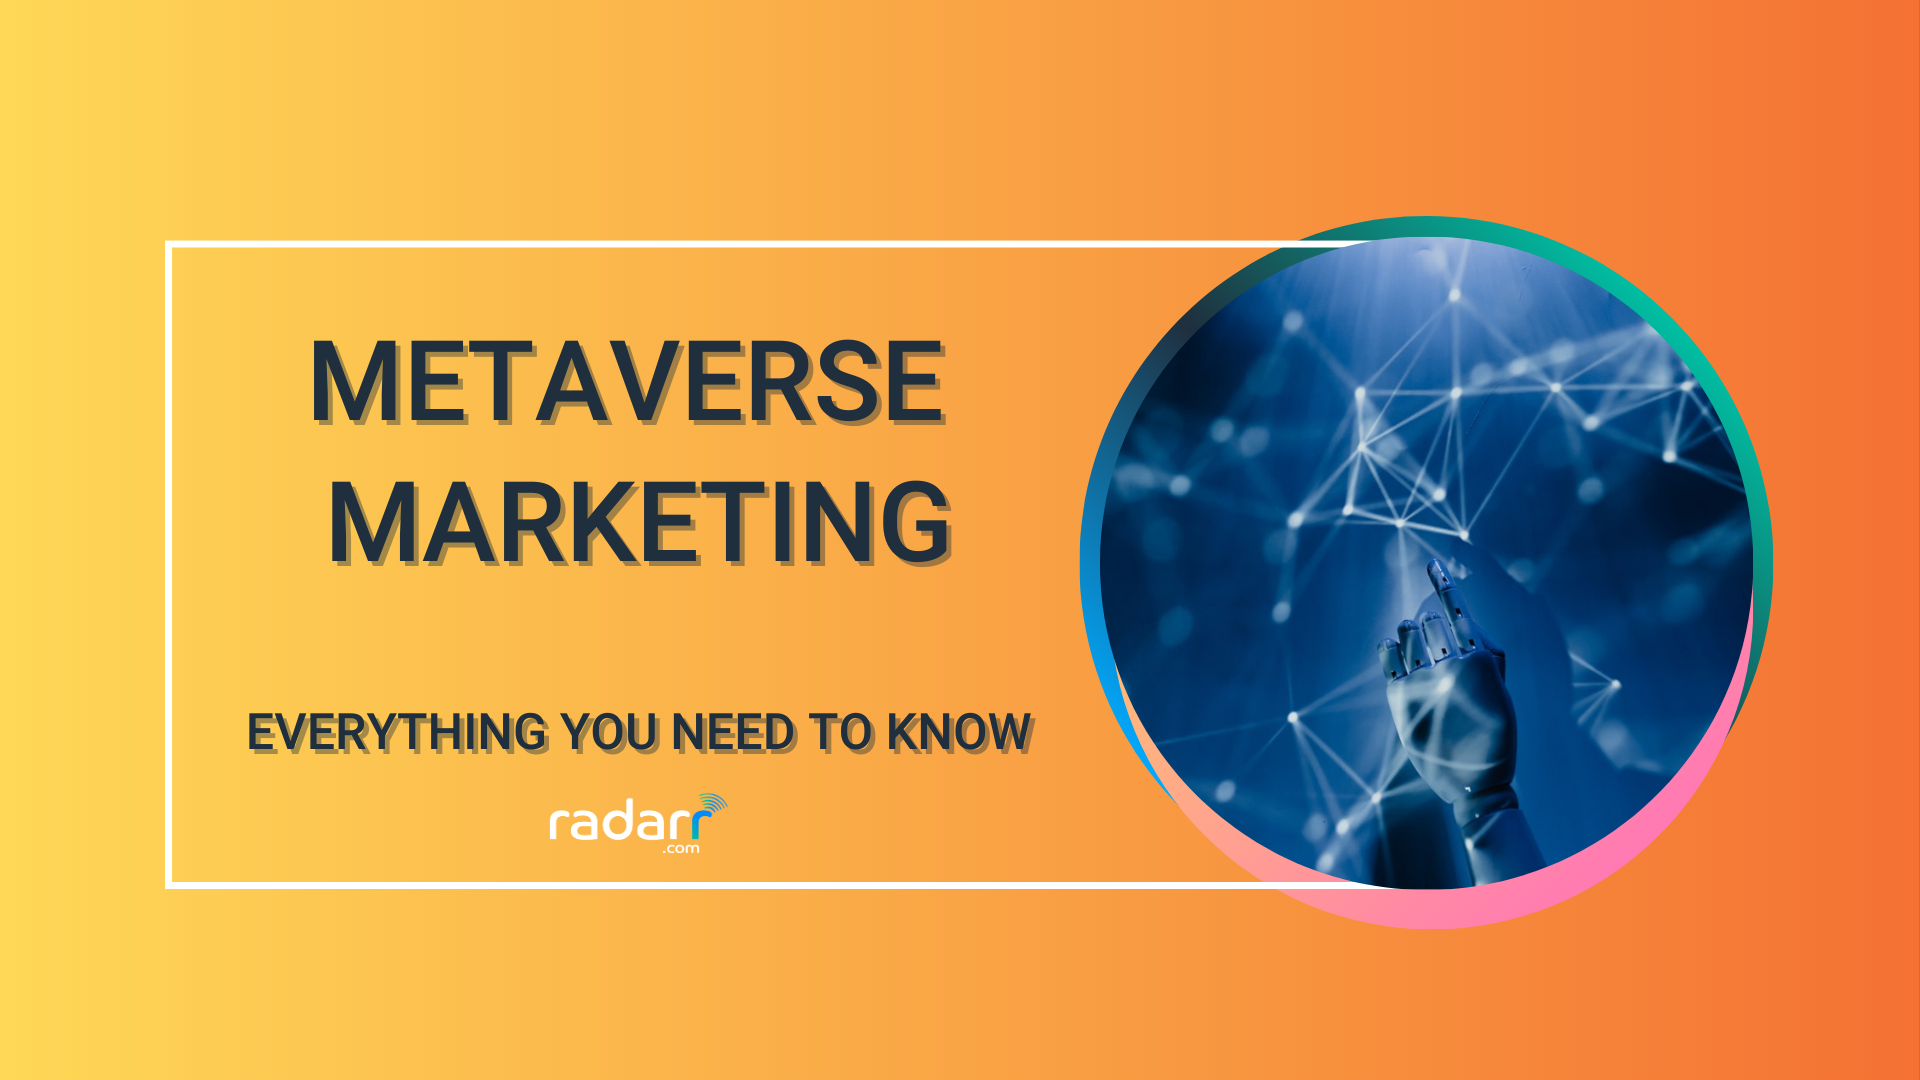 guide to metaverse marketing by radarr